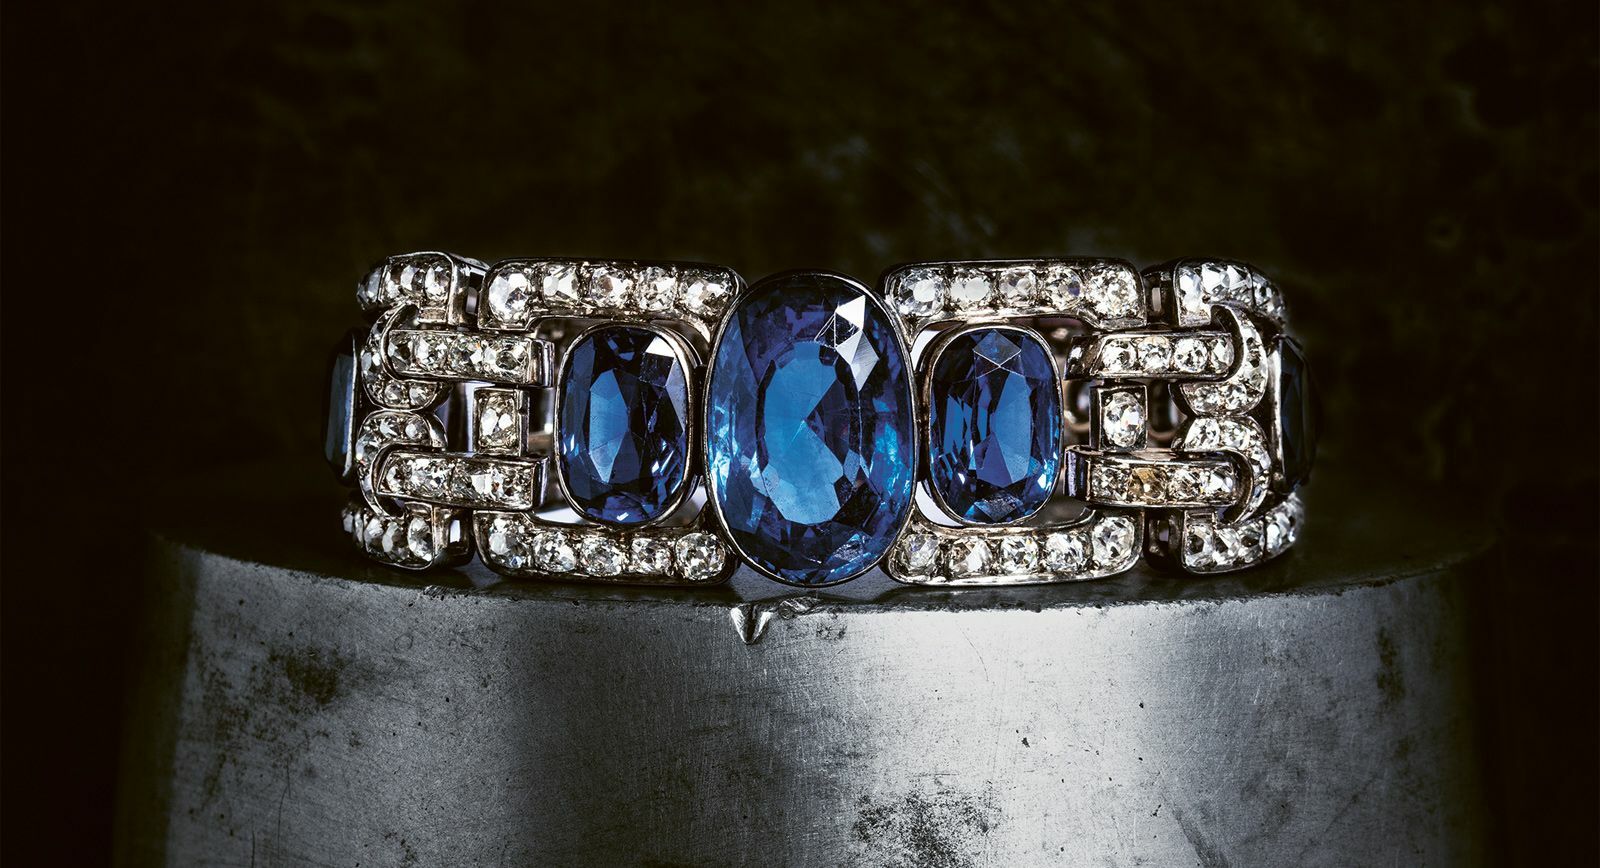 A New Must-See Exhibition By Chaumet: Imperial Splendours: The Art of Jewellery Since The 18th Century